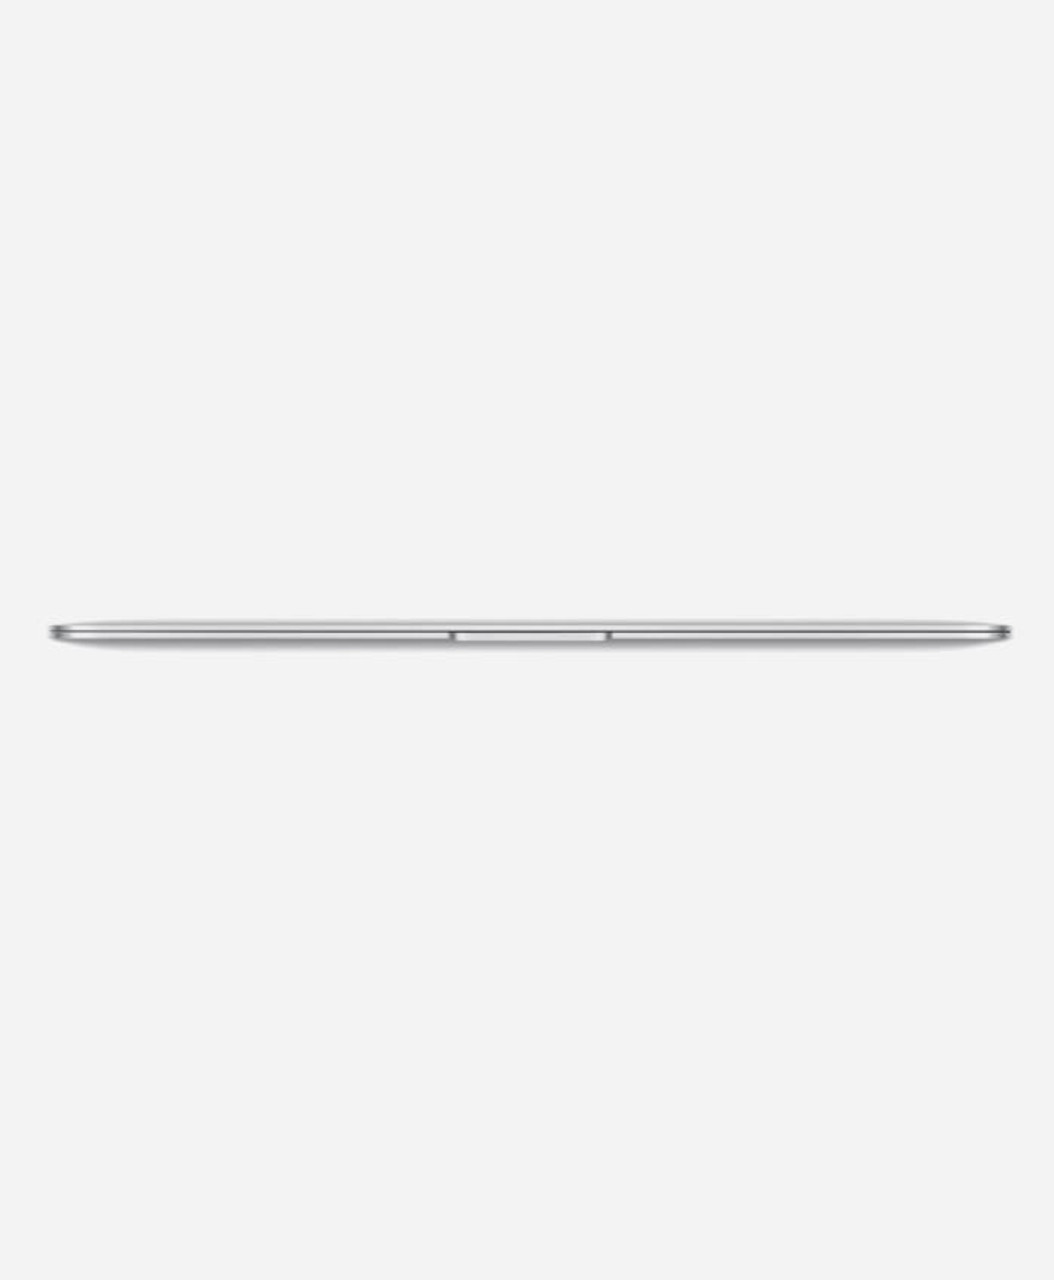 Used Apple Macbook Air 13.3-inch (Retina, Silver) 1.6GHZ Dual Core